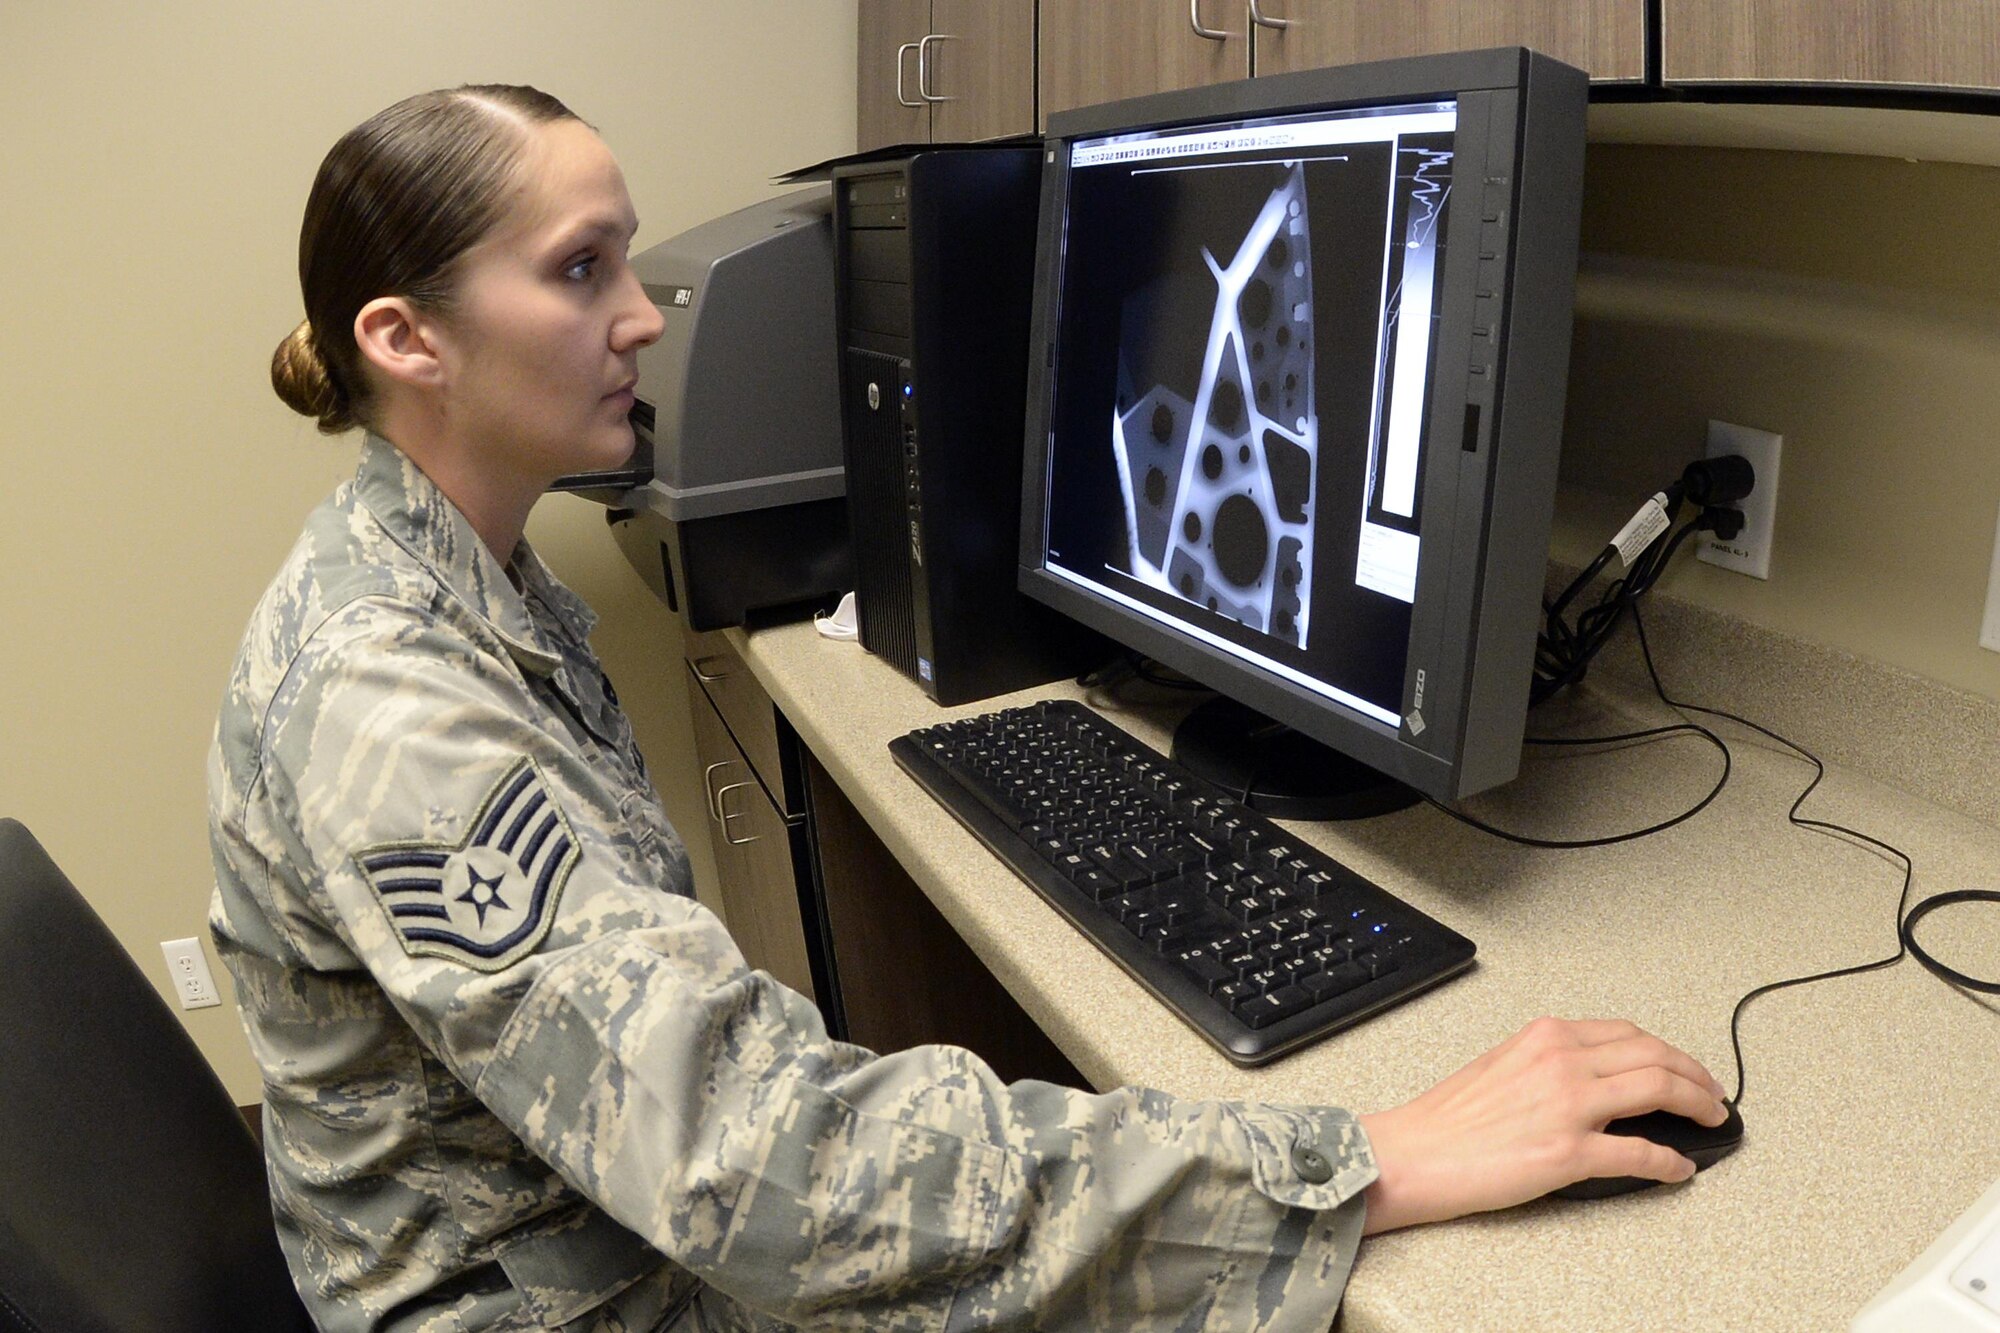 Staff Sgt. Cinnamon Kavlick, 388th Equipment Maintenance Squadron, inspects an X-ray image March 25 in the 388th EMS Non-Destructive Inspection laboratory at Hill Air Force Base, Utah. The 388th EMS NDI lab recently upgraded its radiography equipment with digital capabilities, improving the process of locating small cracks and identifying minute discontinuities in aircraft engines, wings, and other components. (U.S. Air Force photo by Todd Cromar)